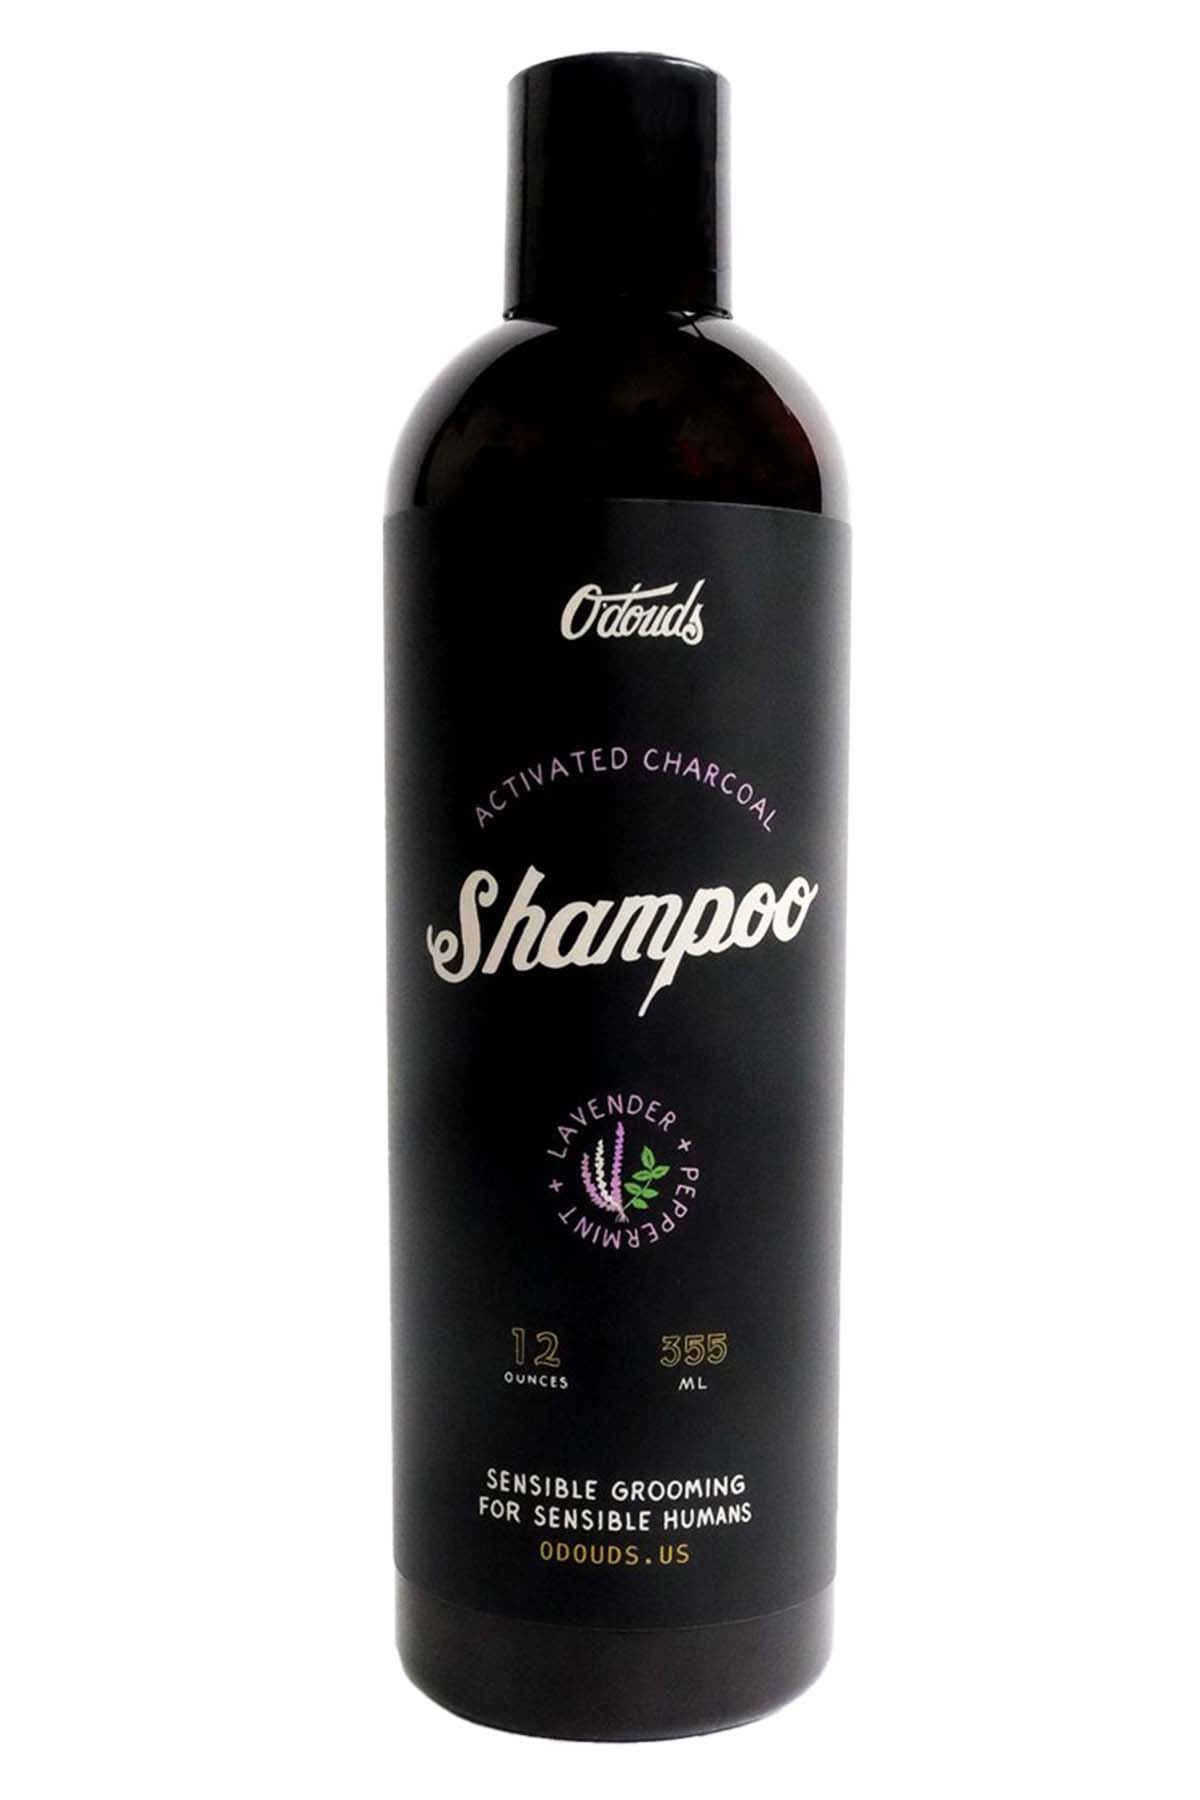 O'Douds Activated Charcoal Shampoo